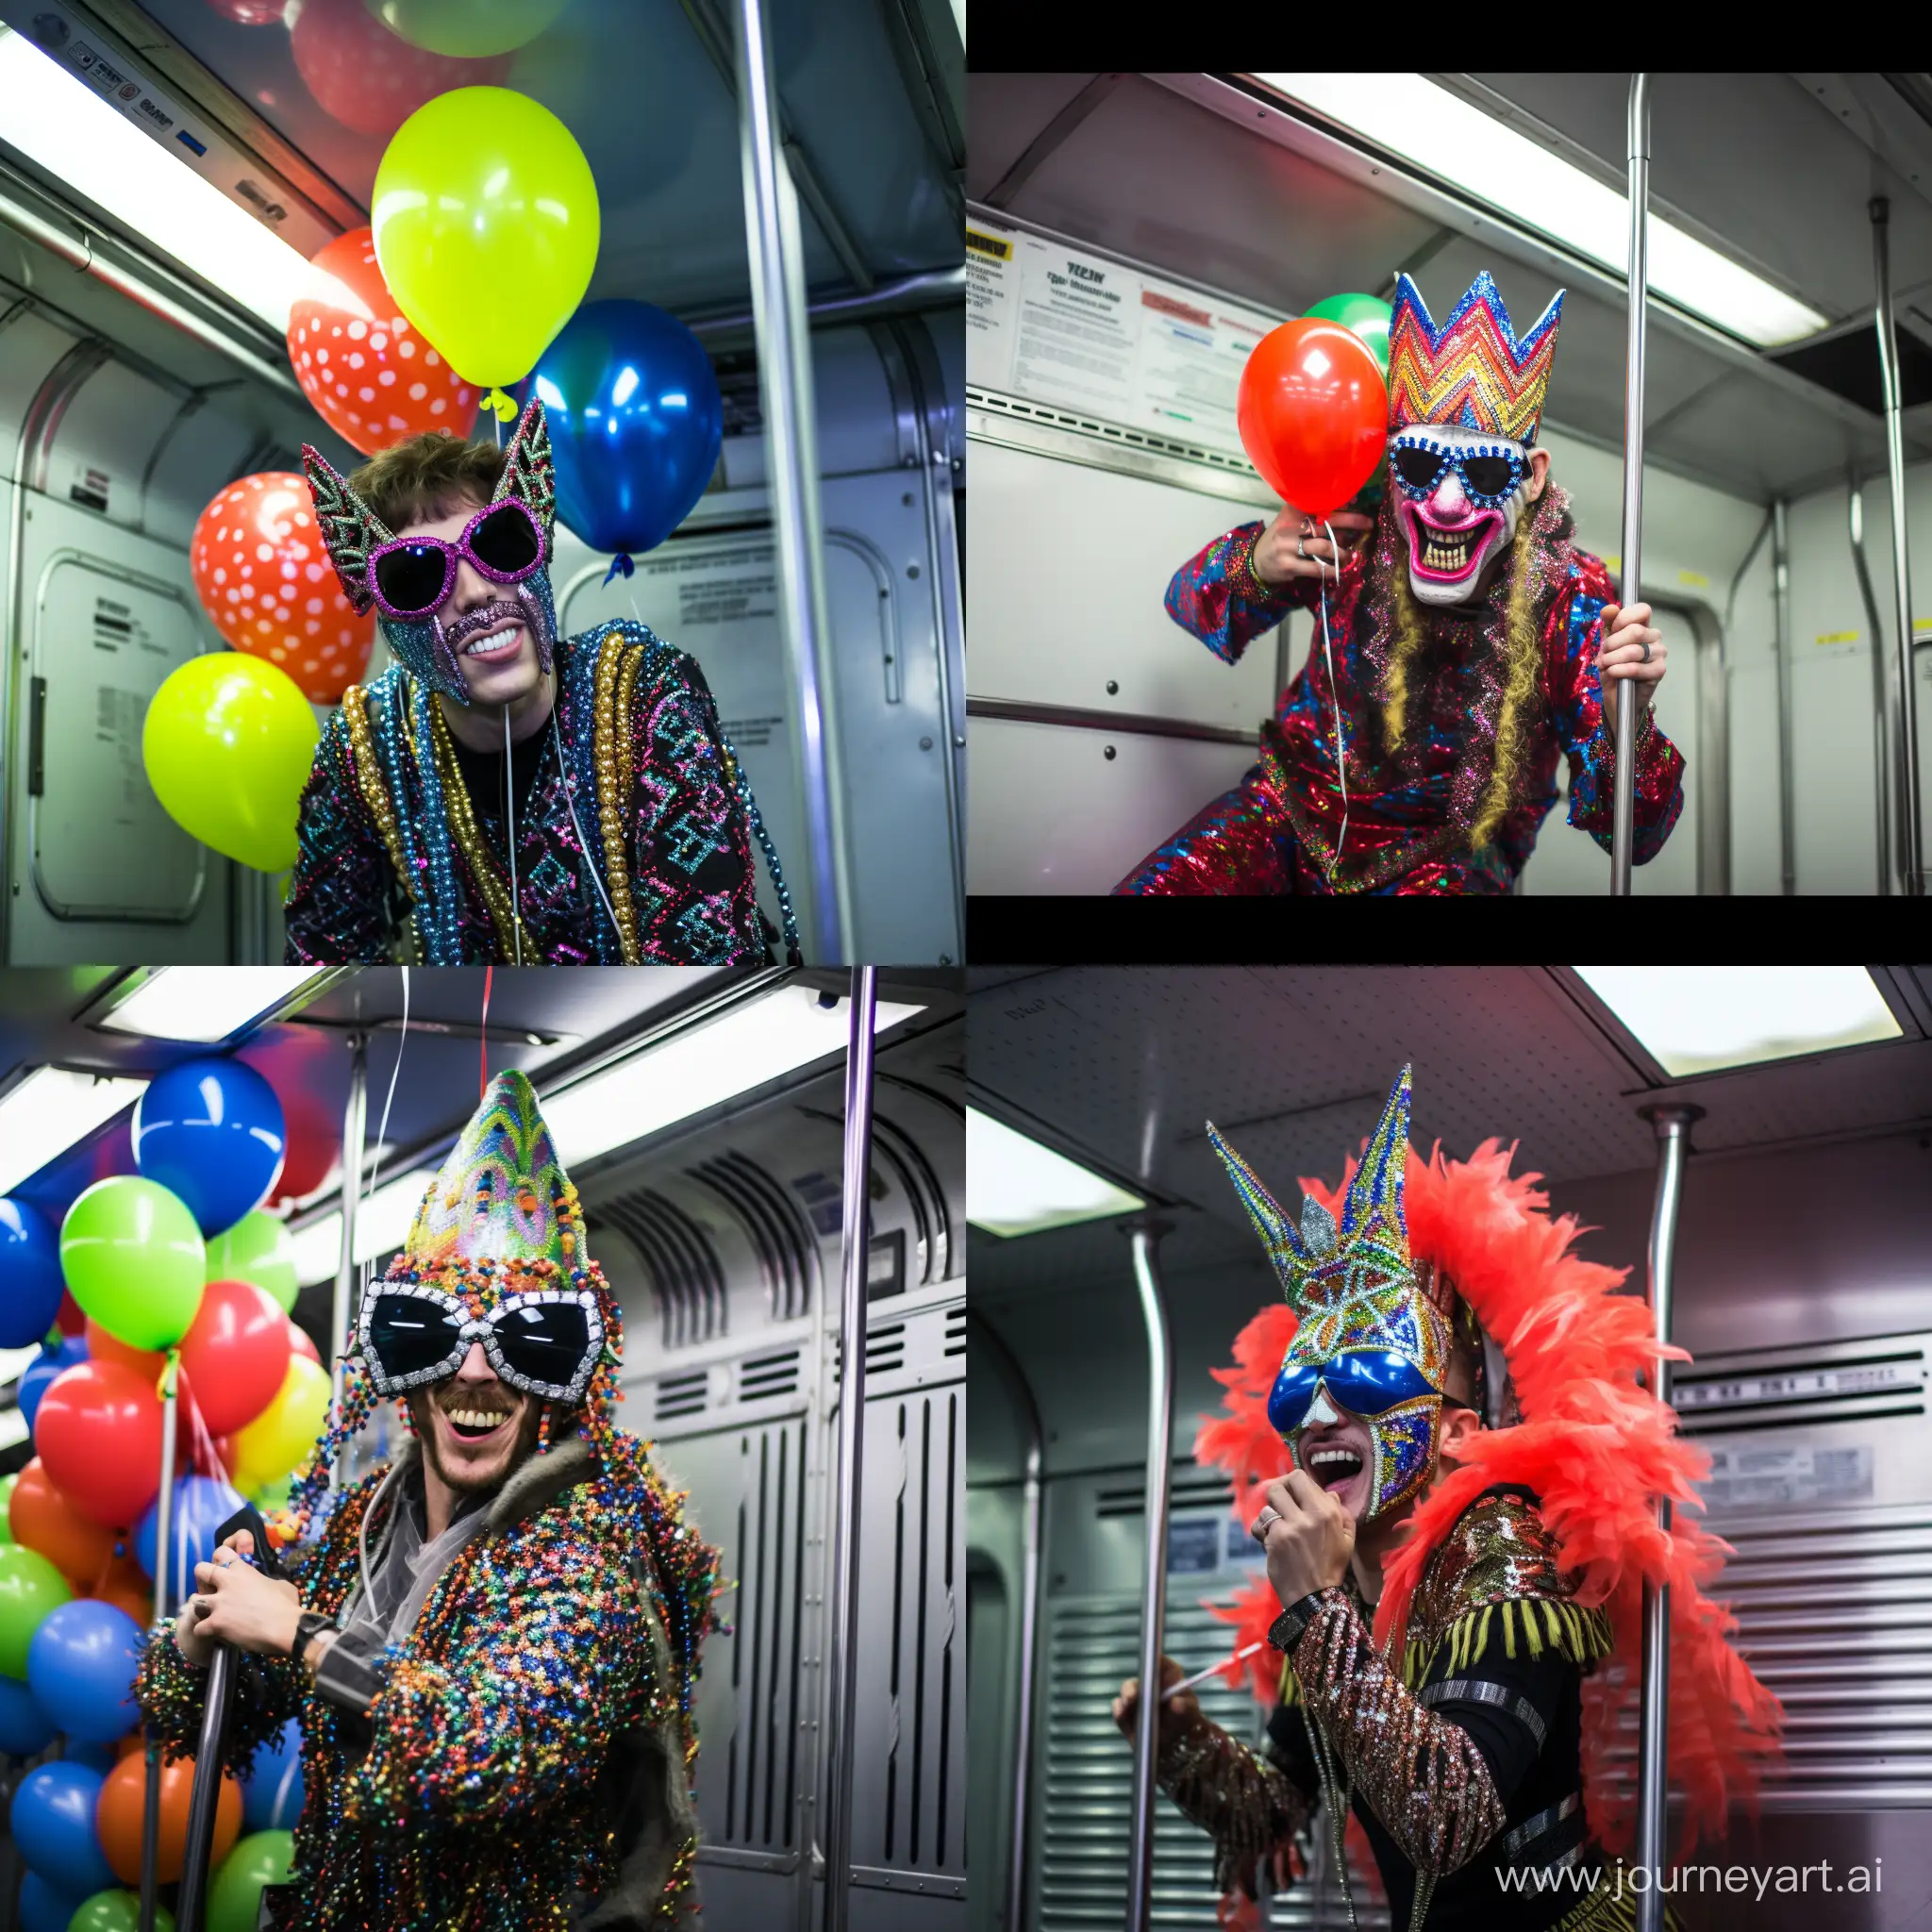 Rave party in the NYC subway